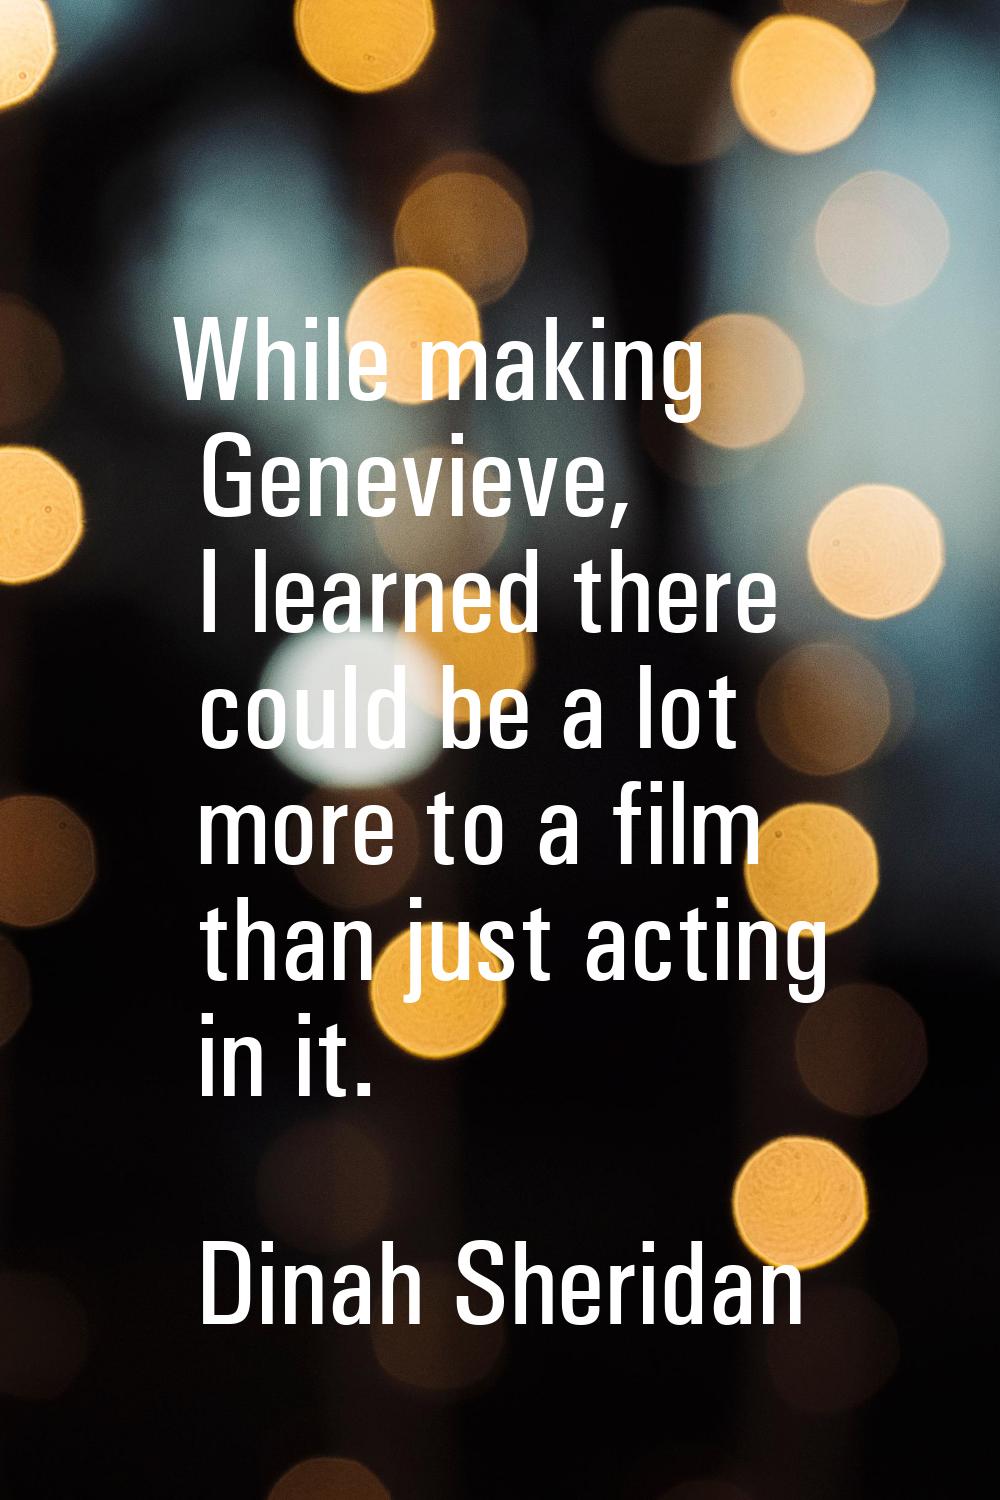 While making Genevieve, I learned there could be a lot more to a film than just acting in it.